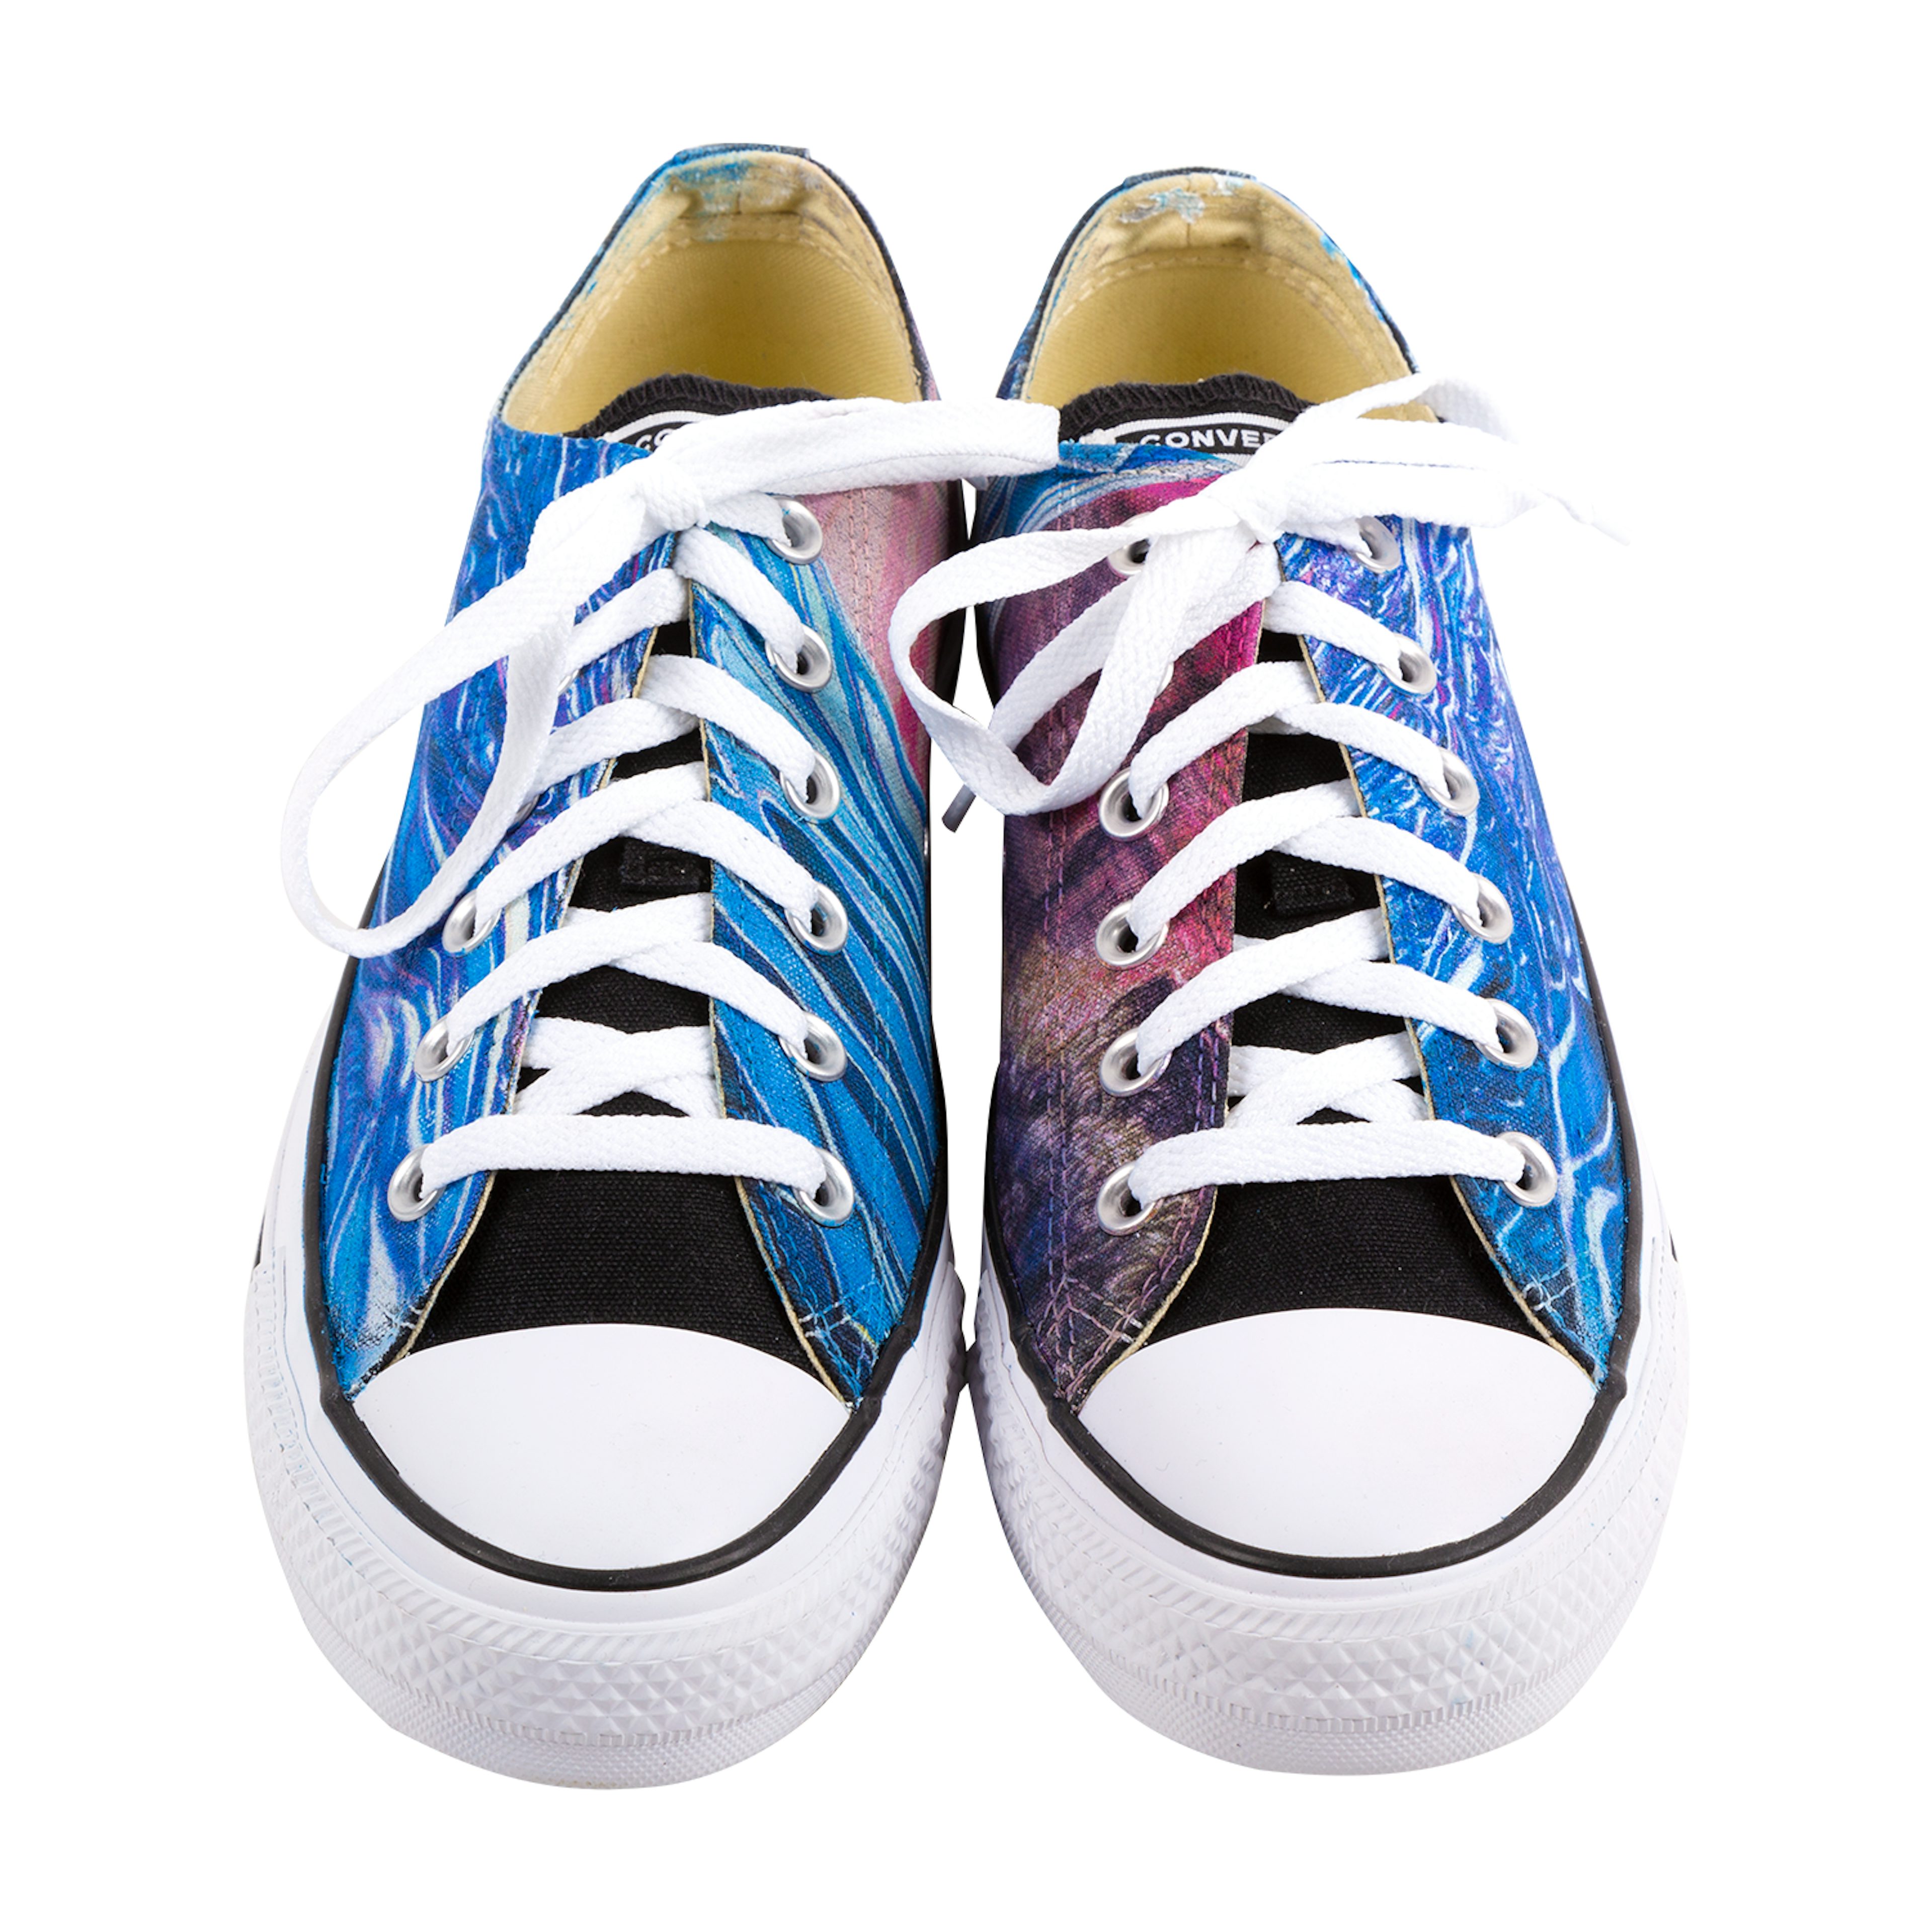 Slightly Stoopid Everyday People Converse Chuck Taylor All Core Ox Lowtops